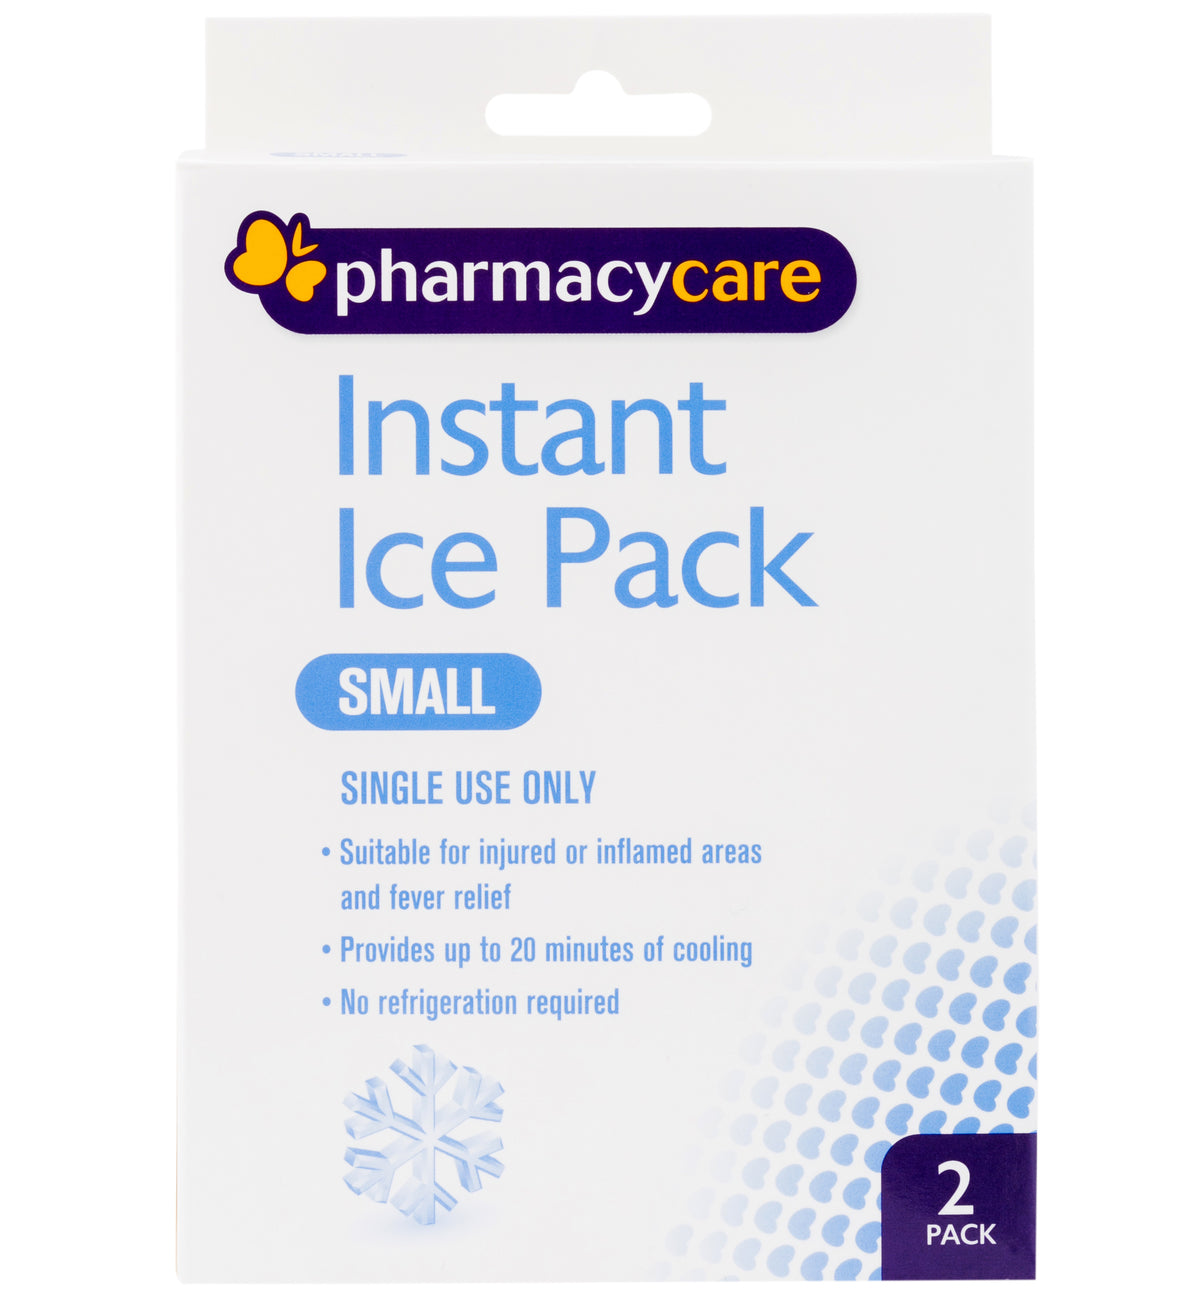 Pharmacy Care Instant Ice Pack Small